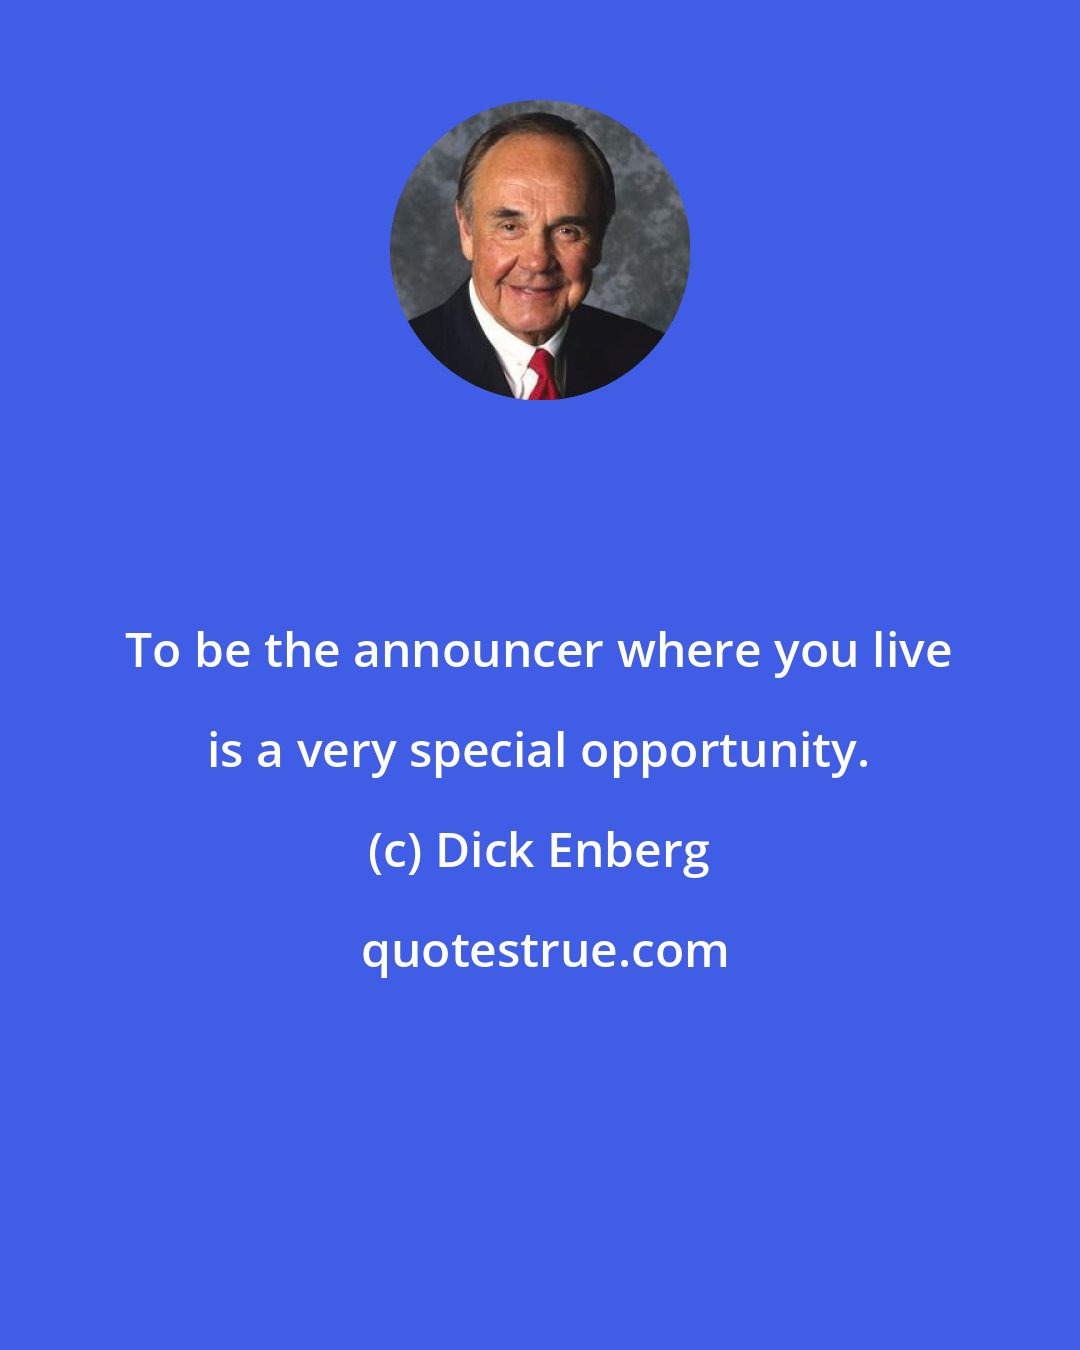 Dick Enberg: To be the announcer where you live is a very special opportunity.